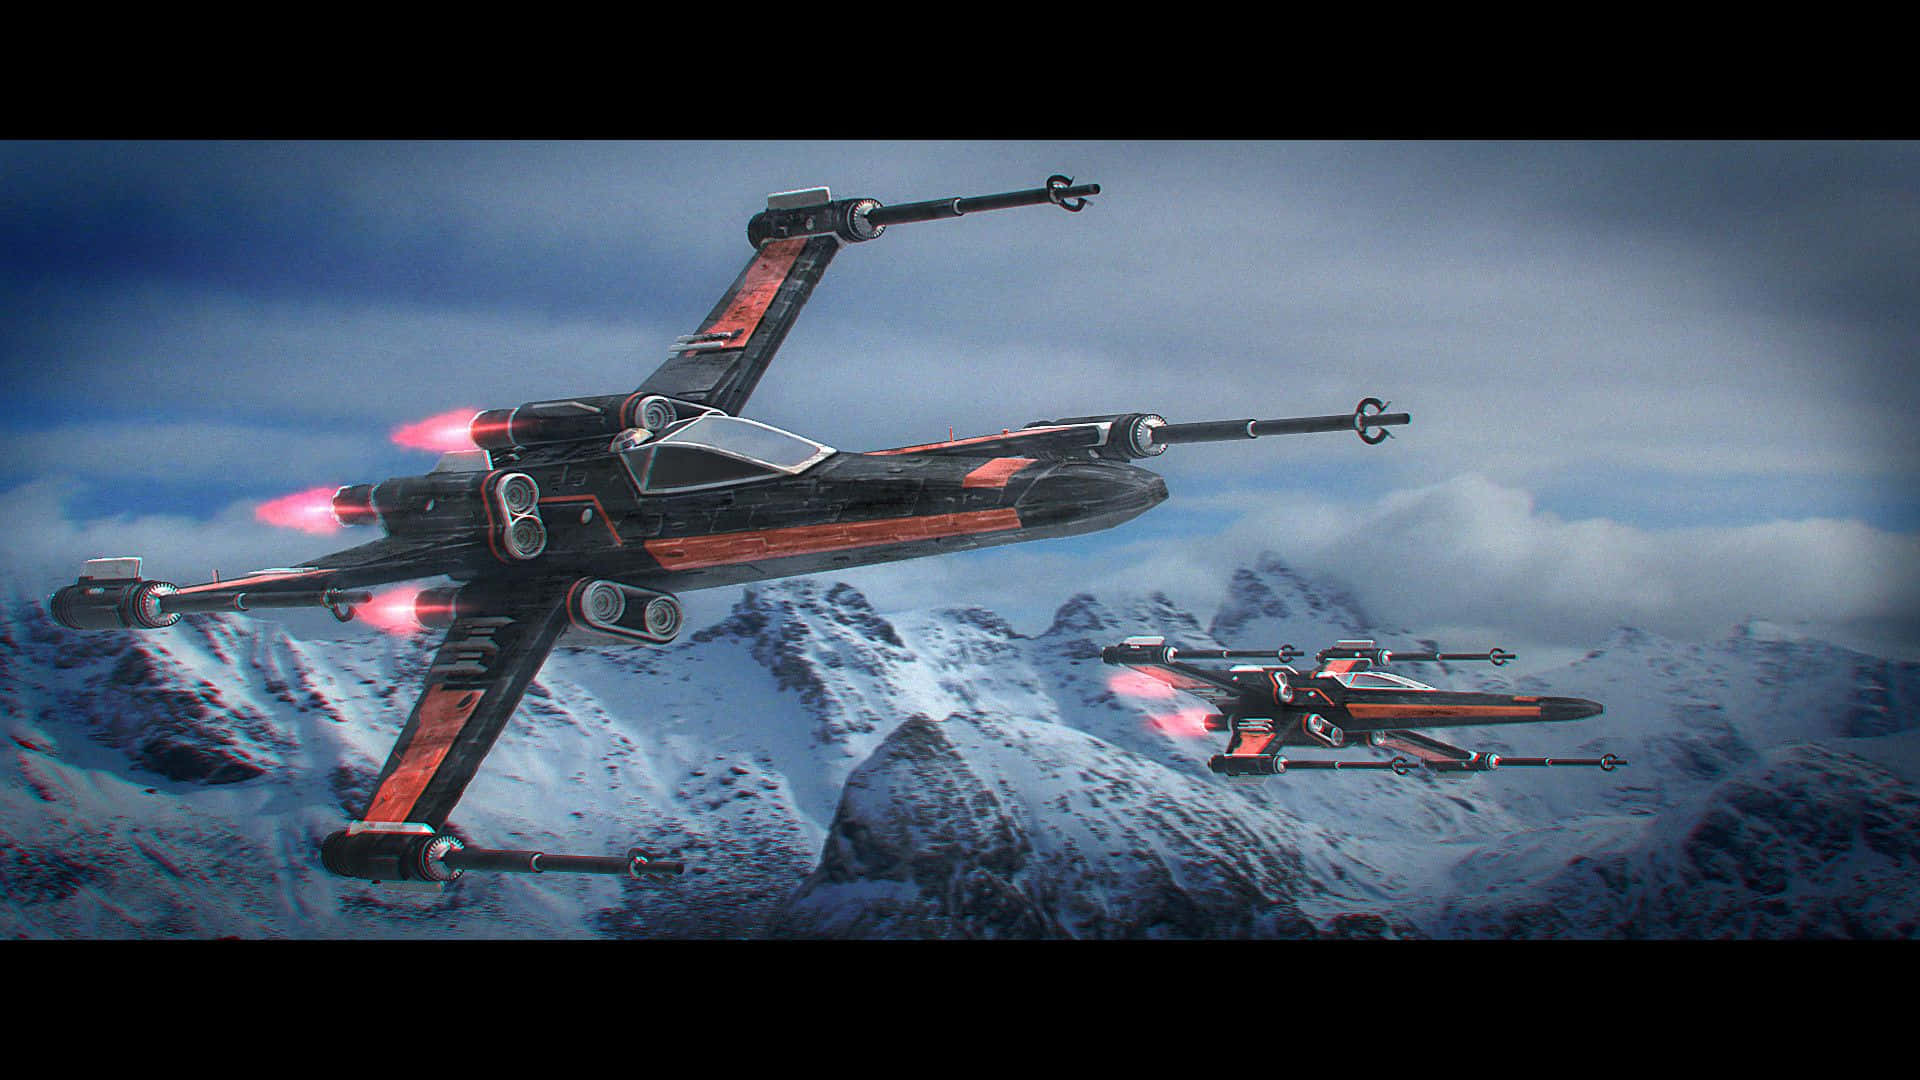 The X-Wing Fighter Takes to the Skies Wallpaper